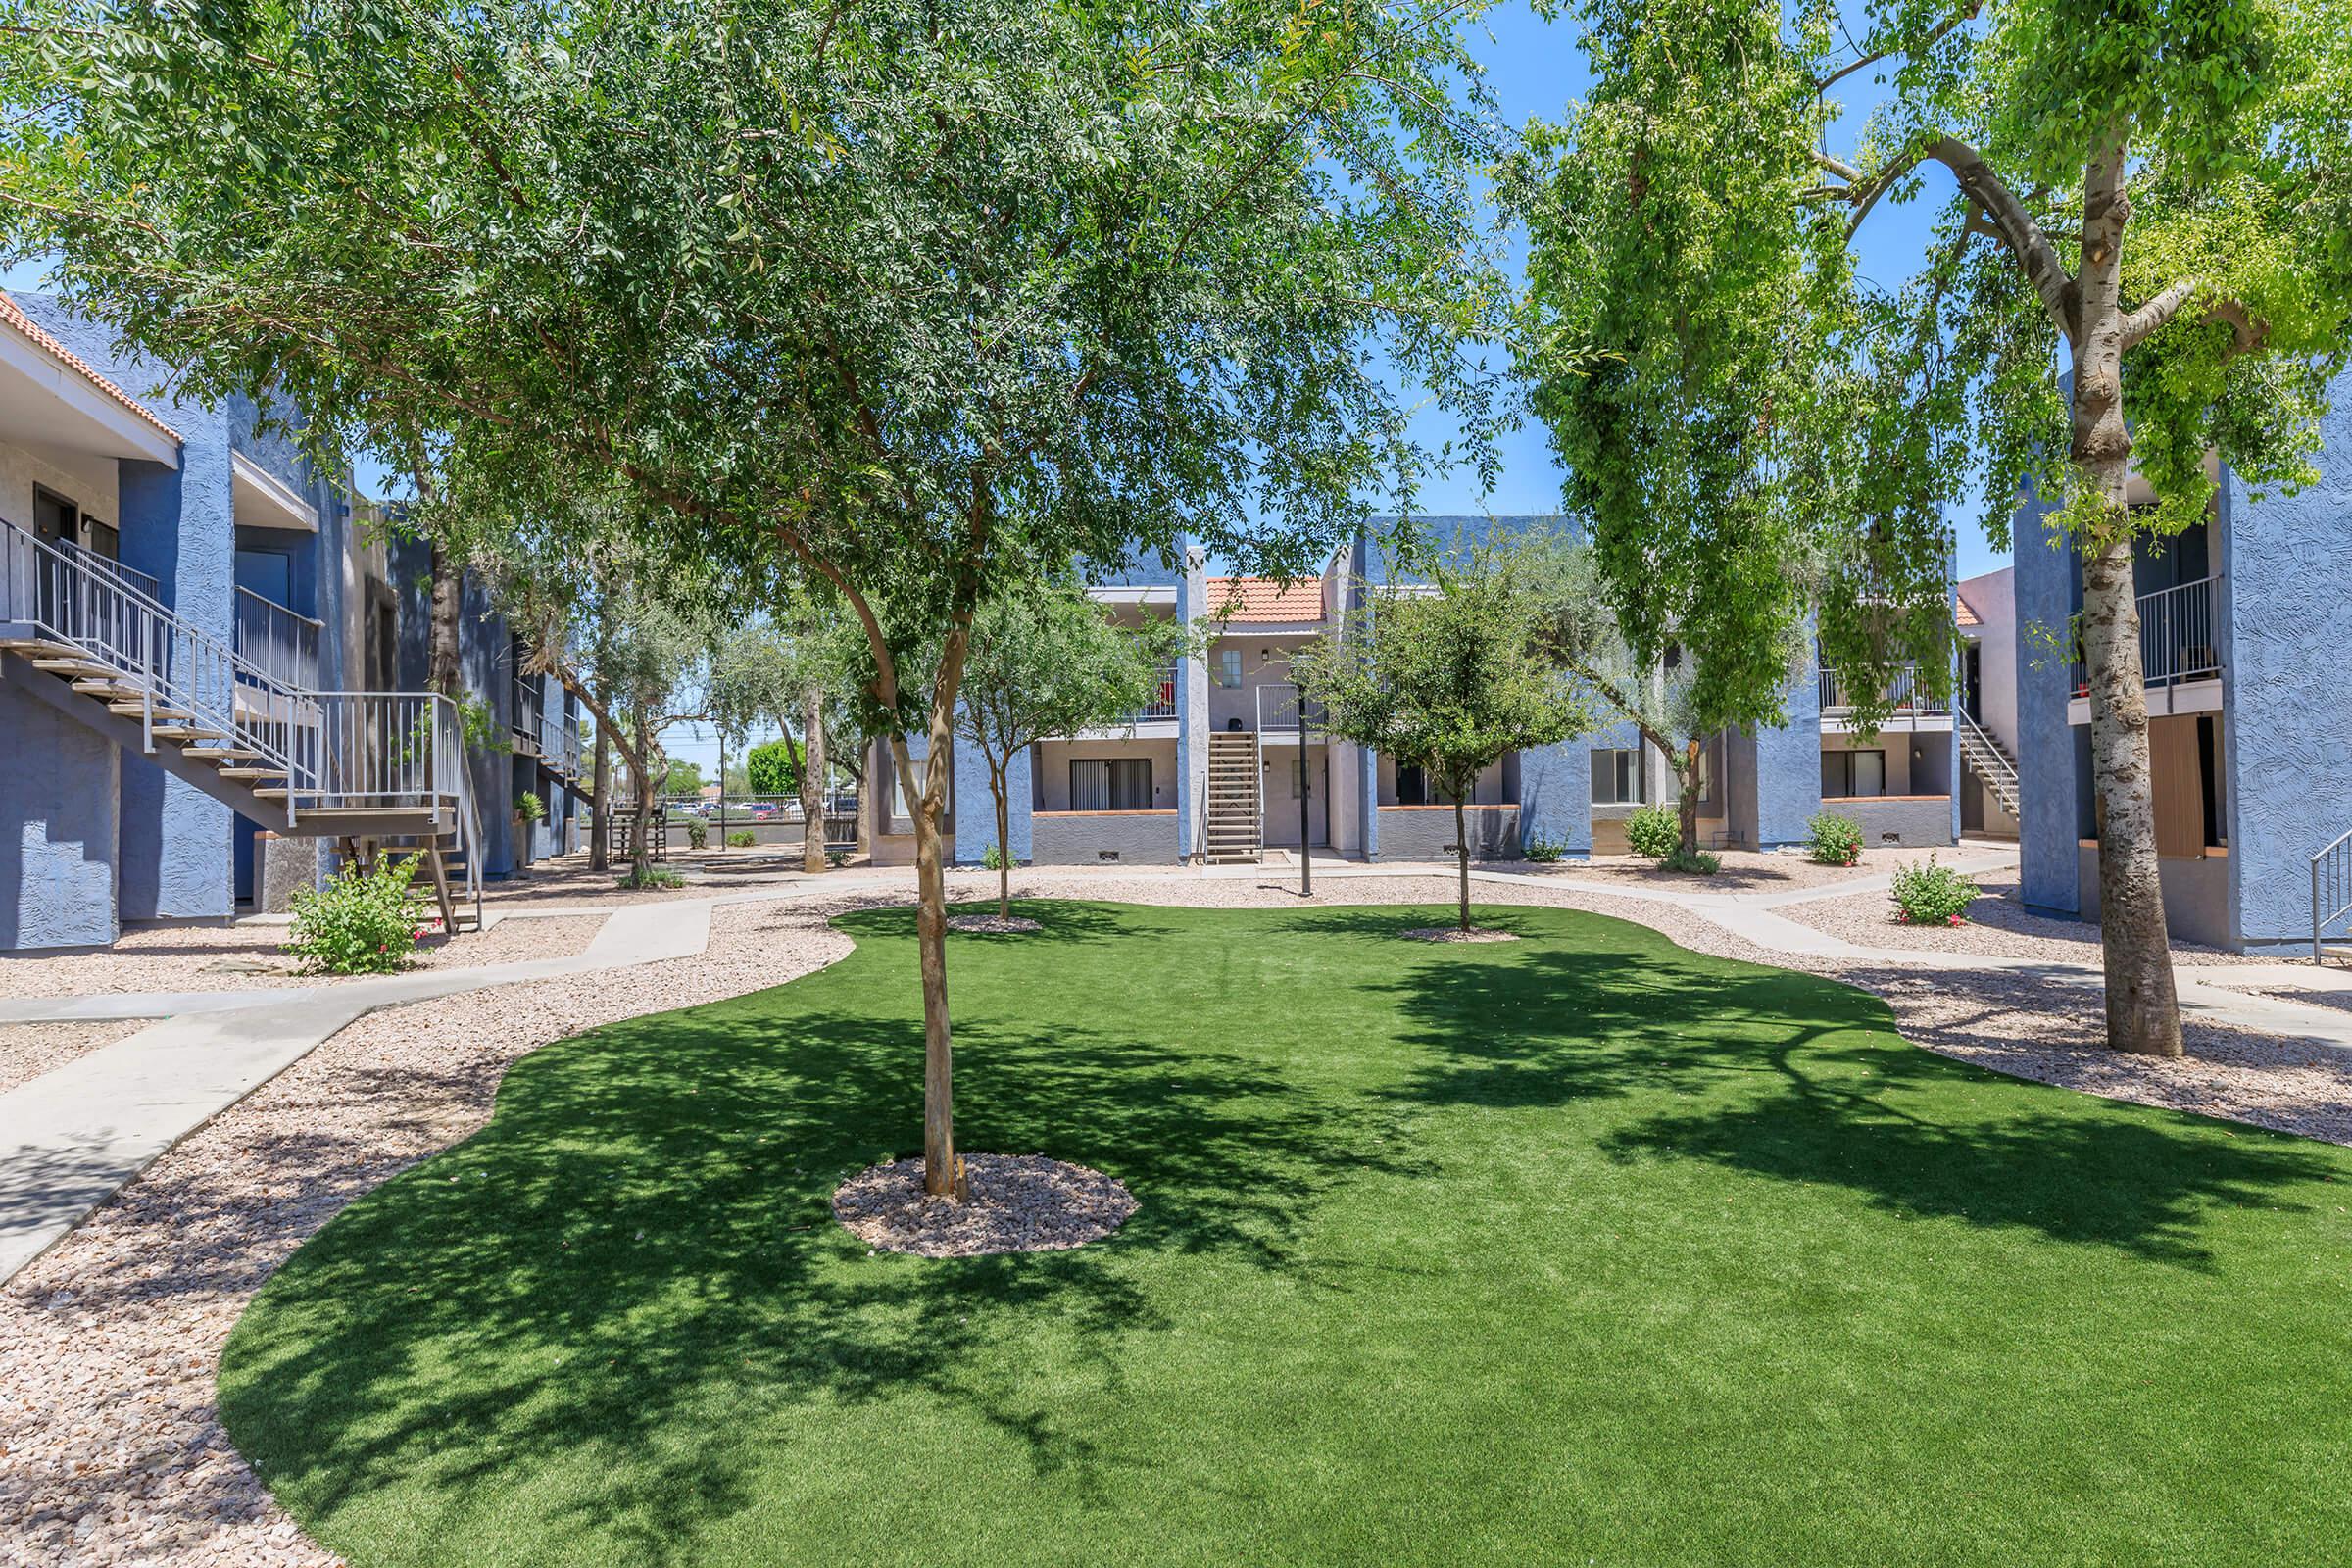 Grass courtyard with trees and shade in front of large apartment buildings